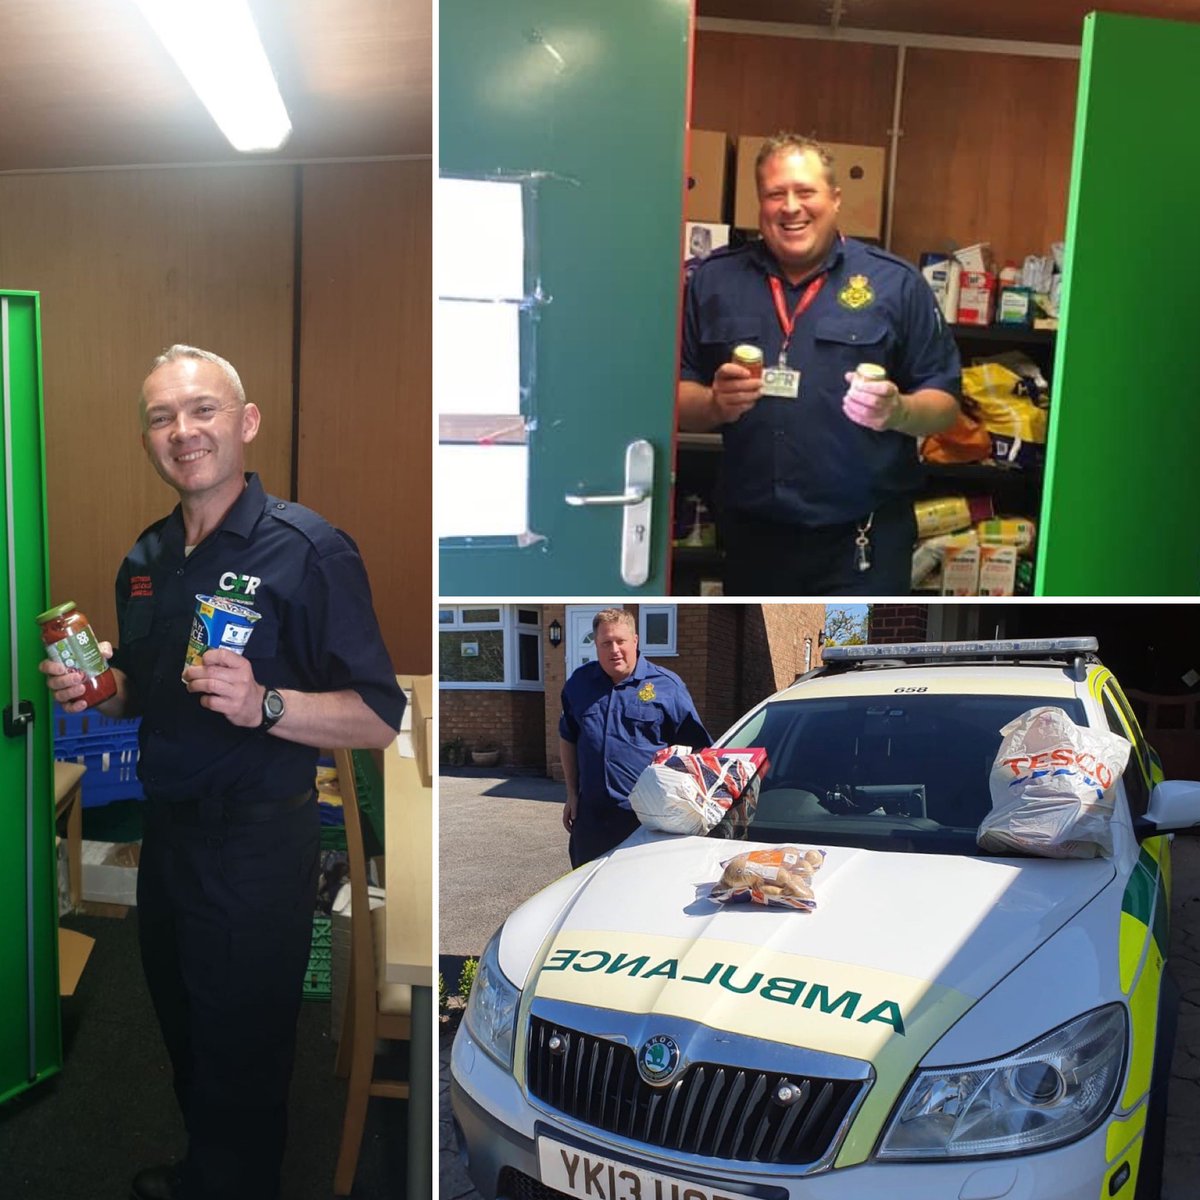 Yesterday and today we have had Gaz out in 658 supporting our communities.

He has been delivering food and shopping for Burntwood Be A Friend and is working at a foodbank today with Andy. Give them a wave if you see them going past 👋

#support #DoingWhatWeCan